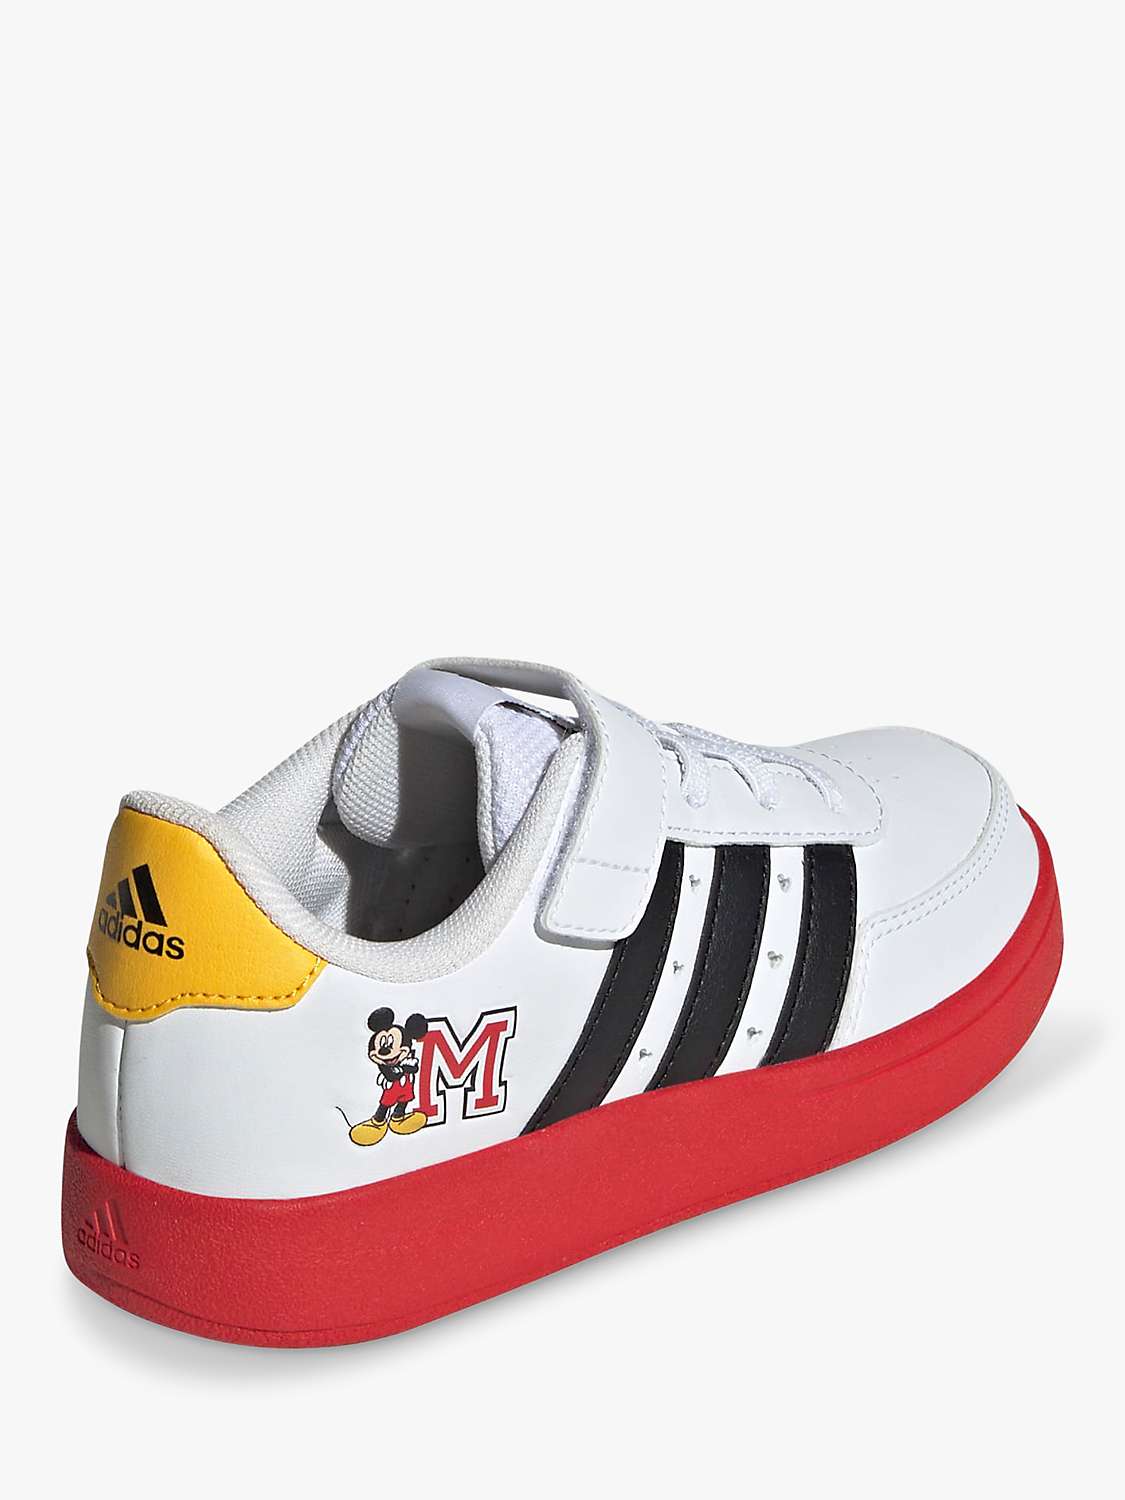 Buy adidas Kids' Breaknet 2.0 X Disney Mickey Graphic Trainers, White/Black/Red Online at johnlewis.com